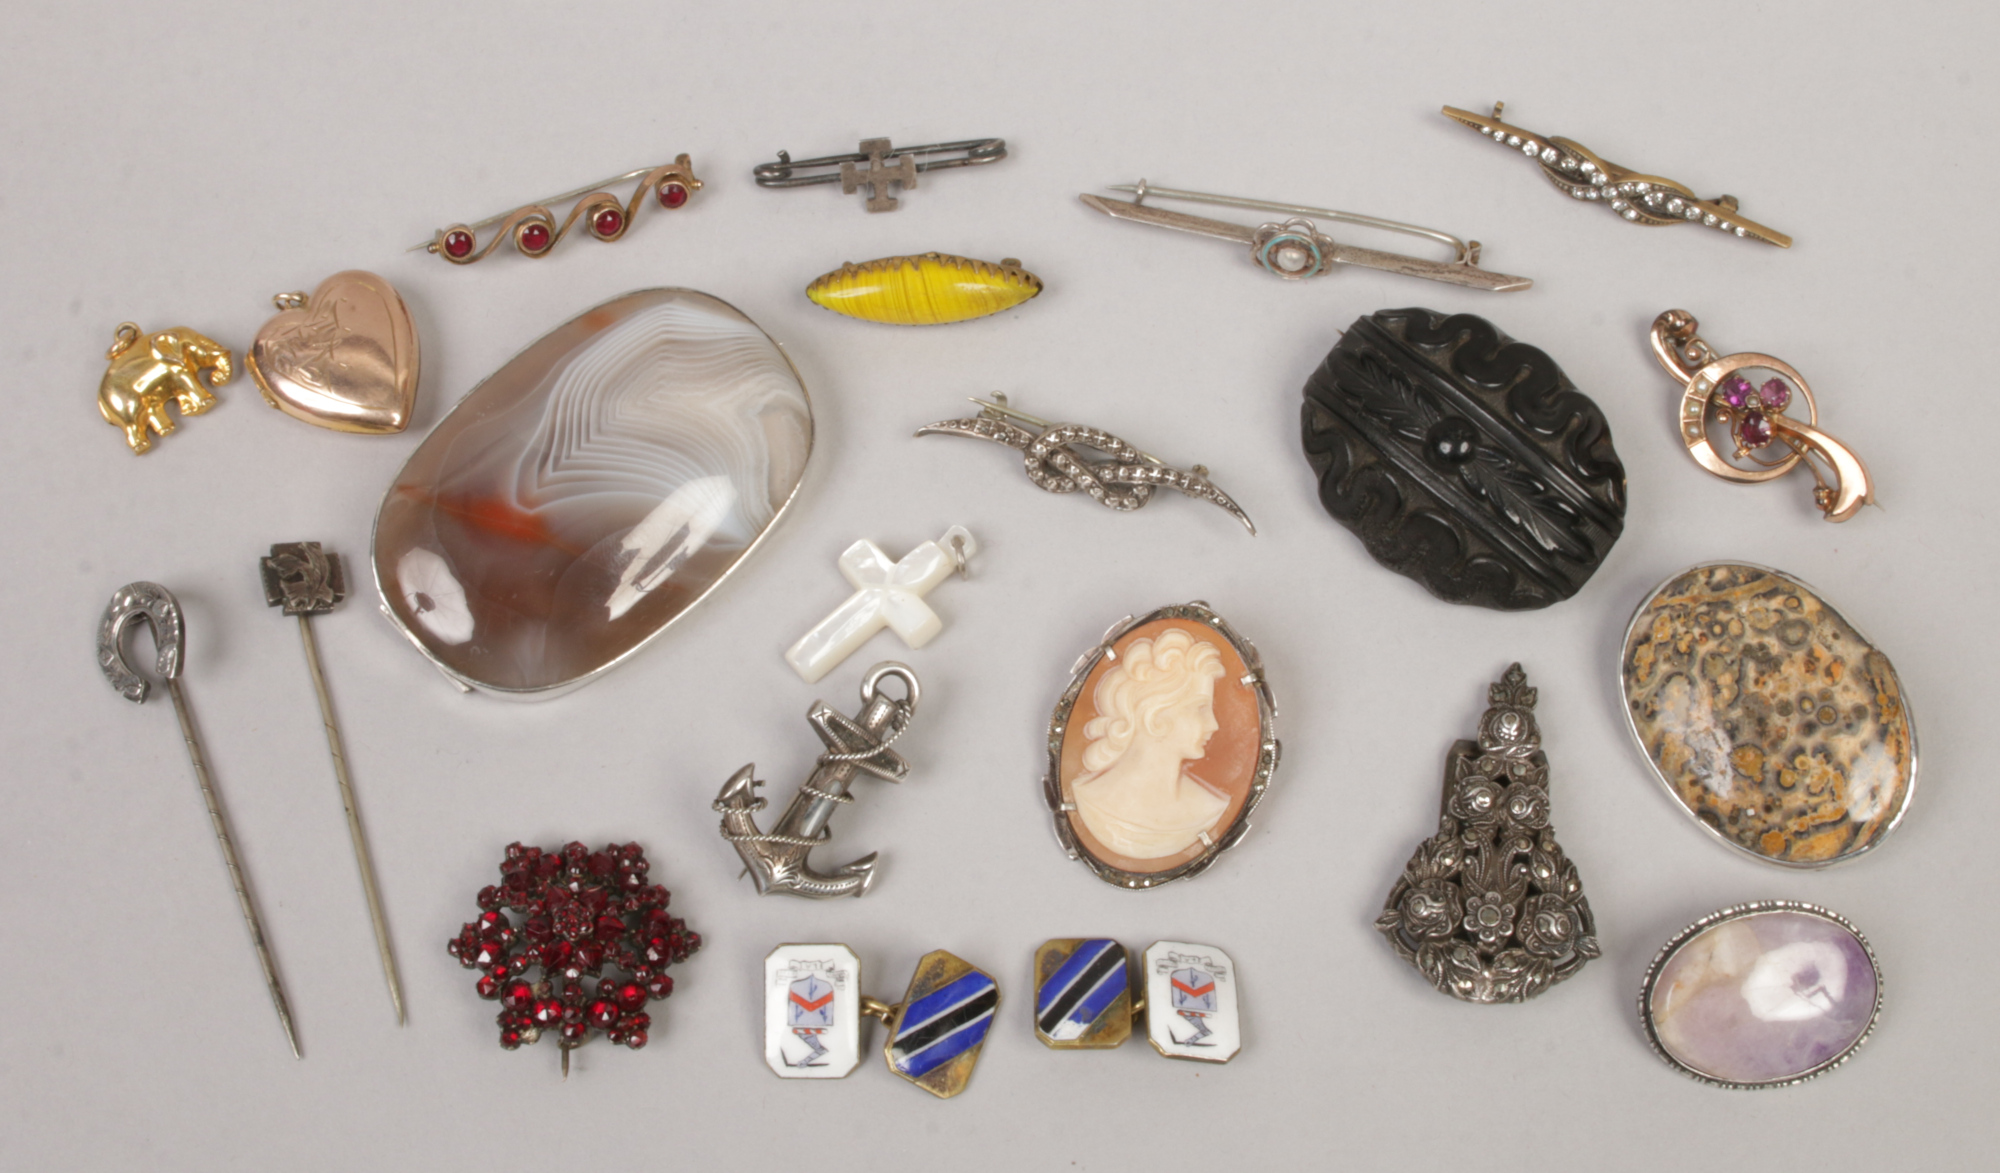 Jewellery - a box of mixed brooches, stick pins and cufflinks including agate and cameo brooches,